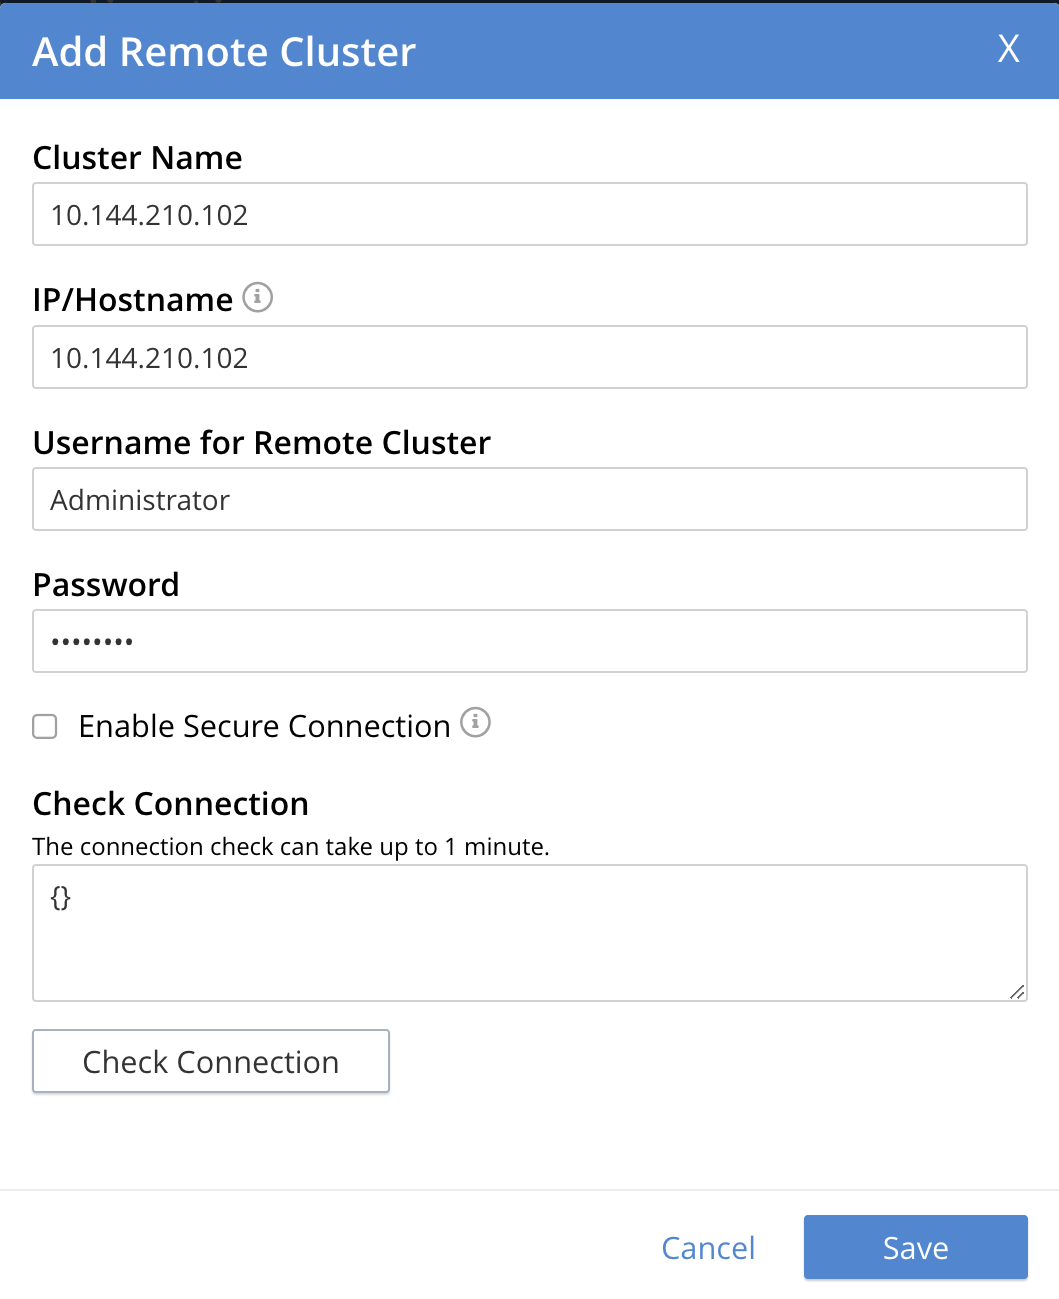 xdcr add remote cluster dialog complete